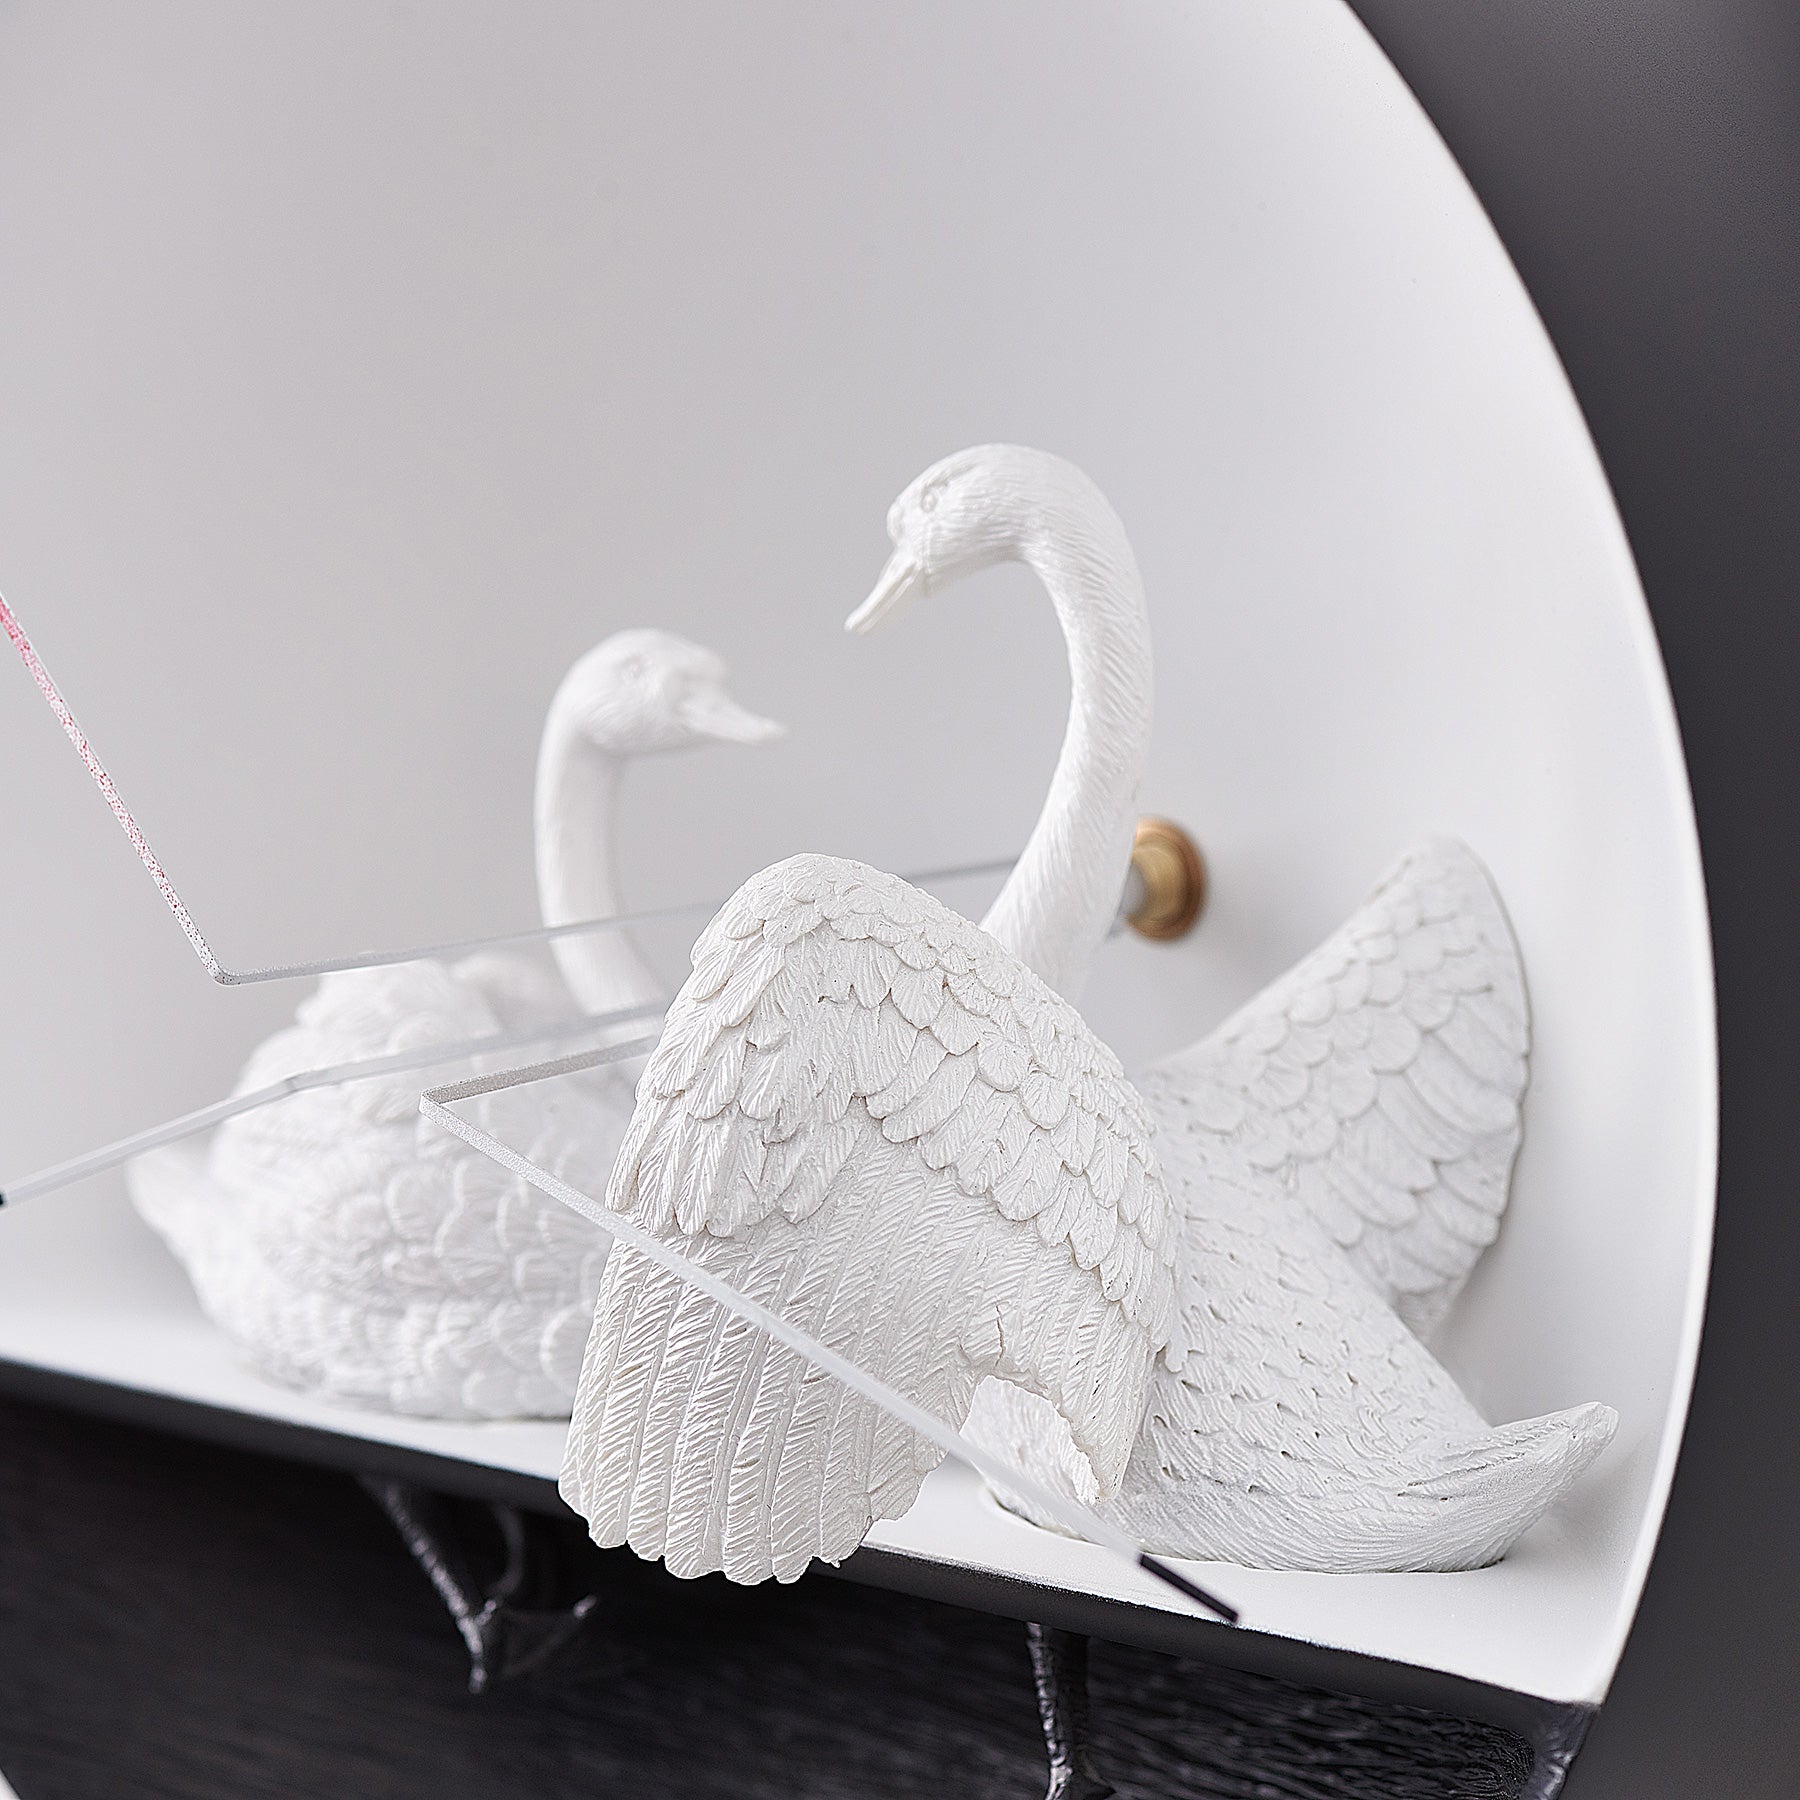 Modern Wall Clock with Swan Figurines to Sculpture Decor